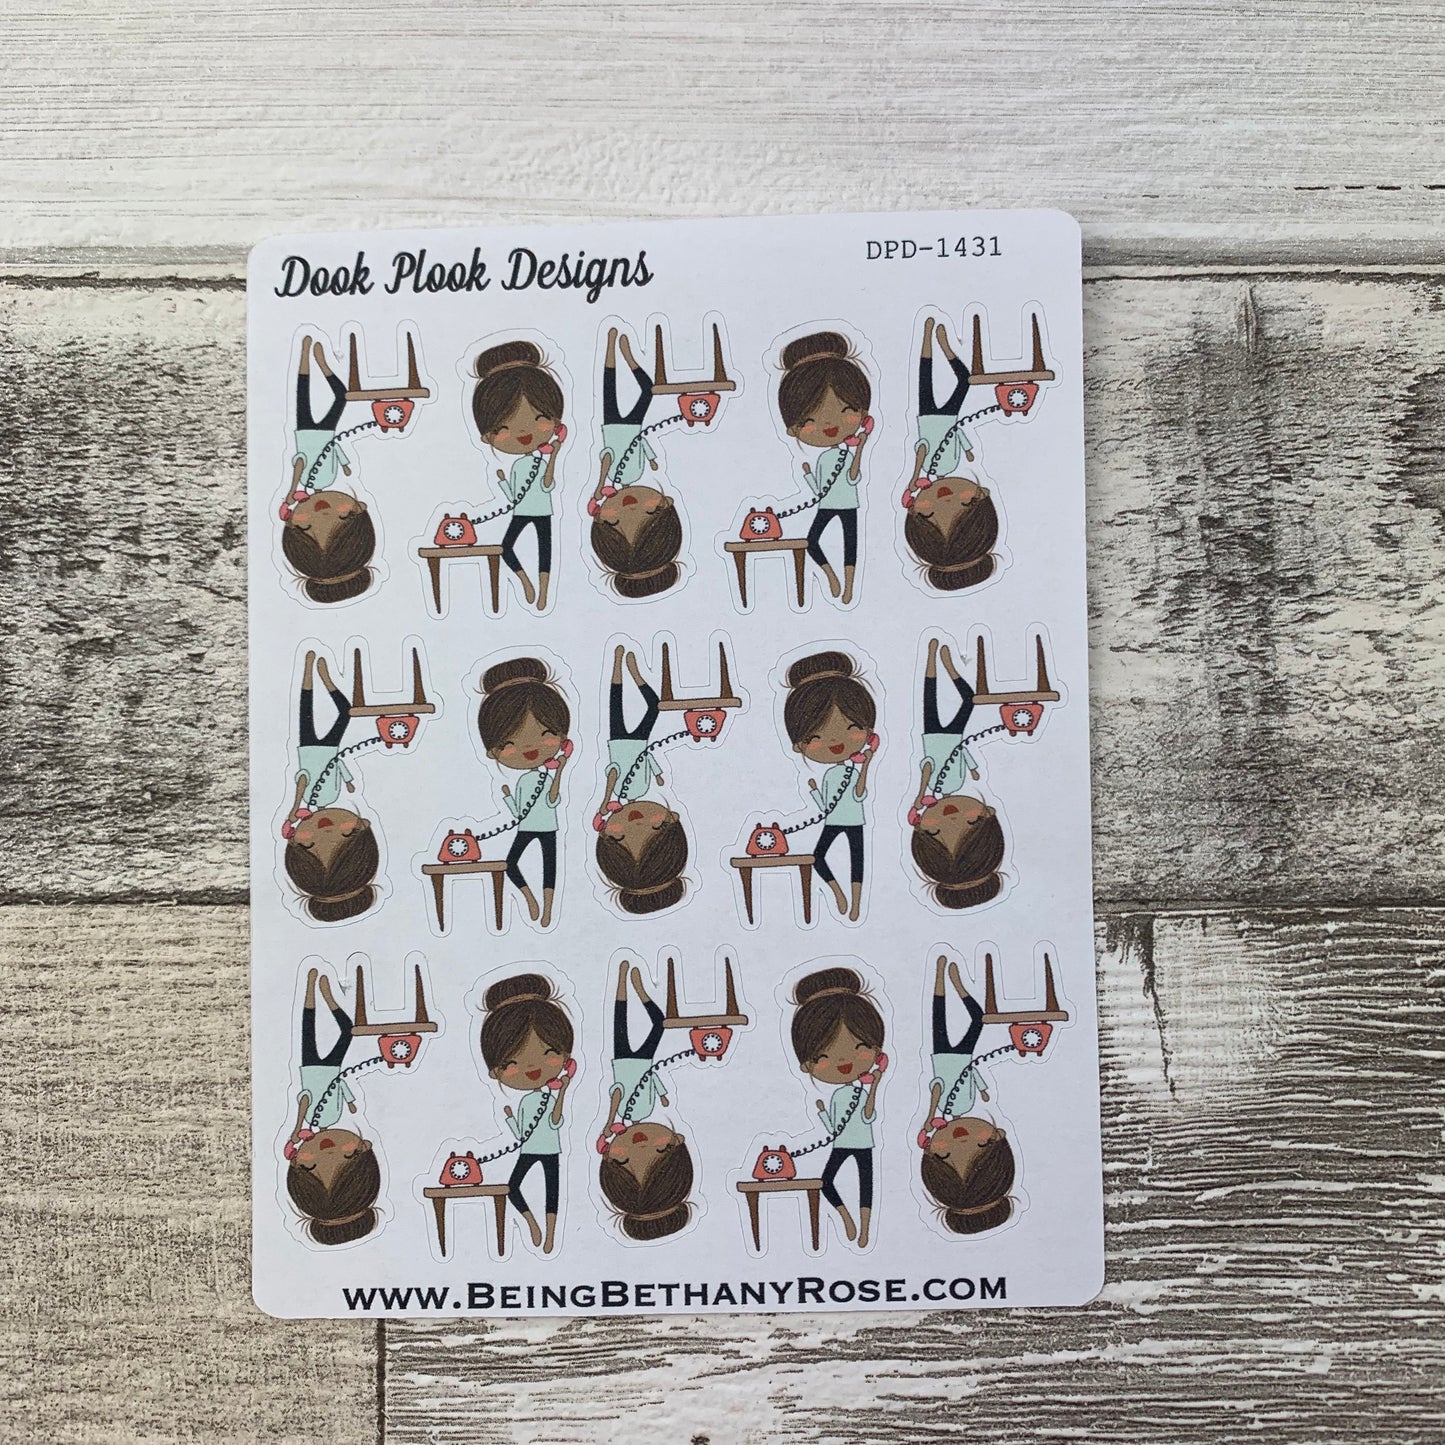 Black Woman - Phone Stickers (DPD1431)